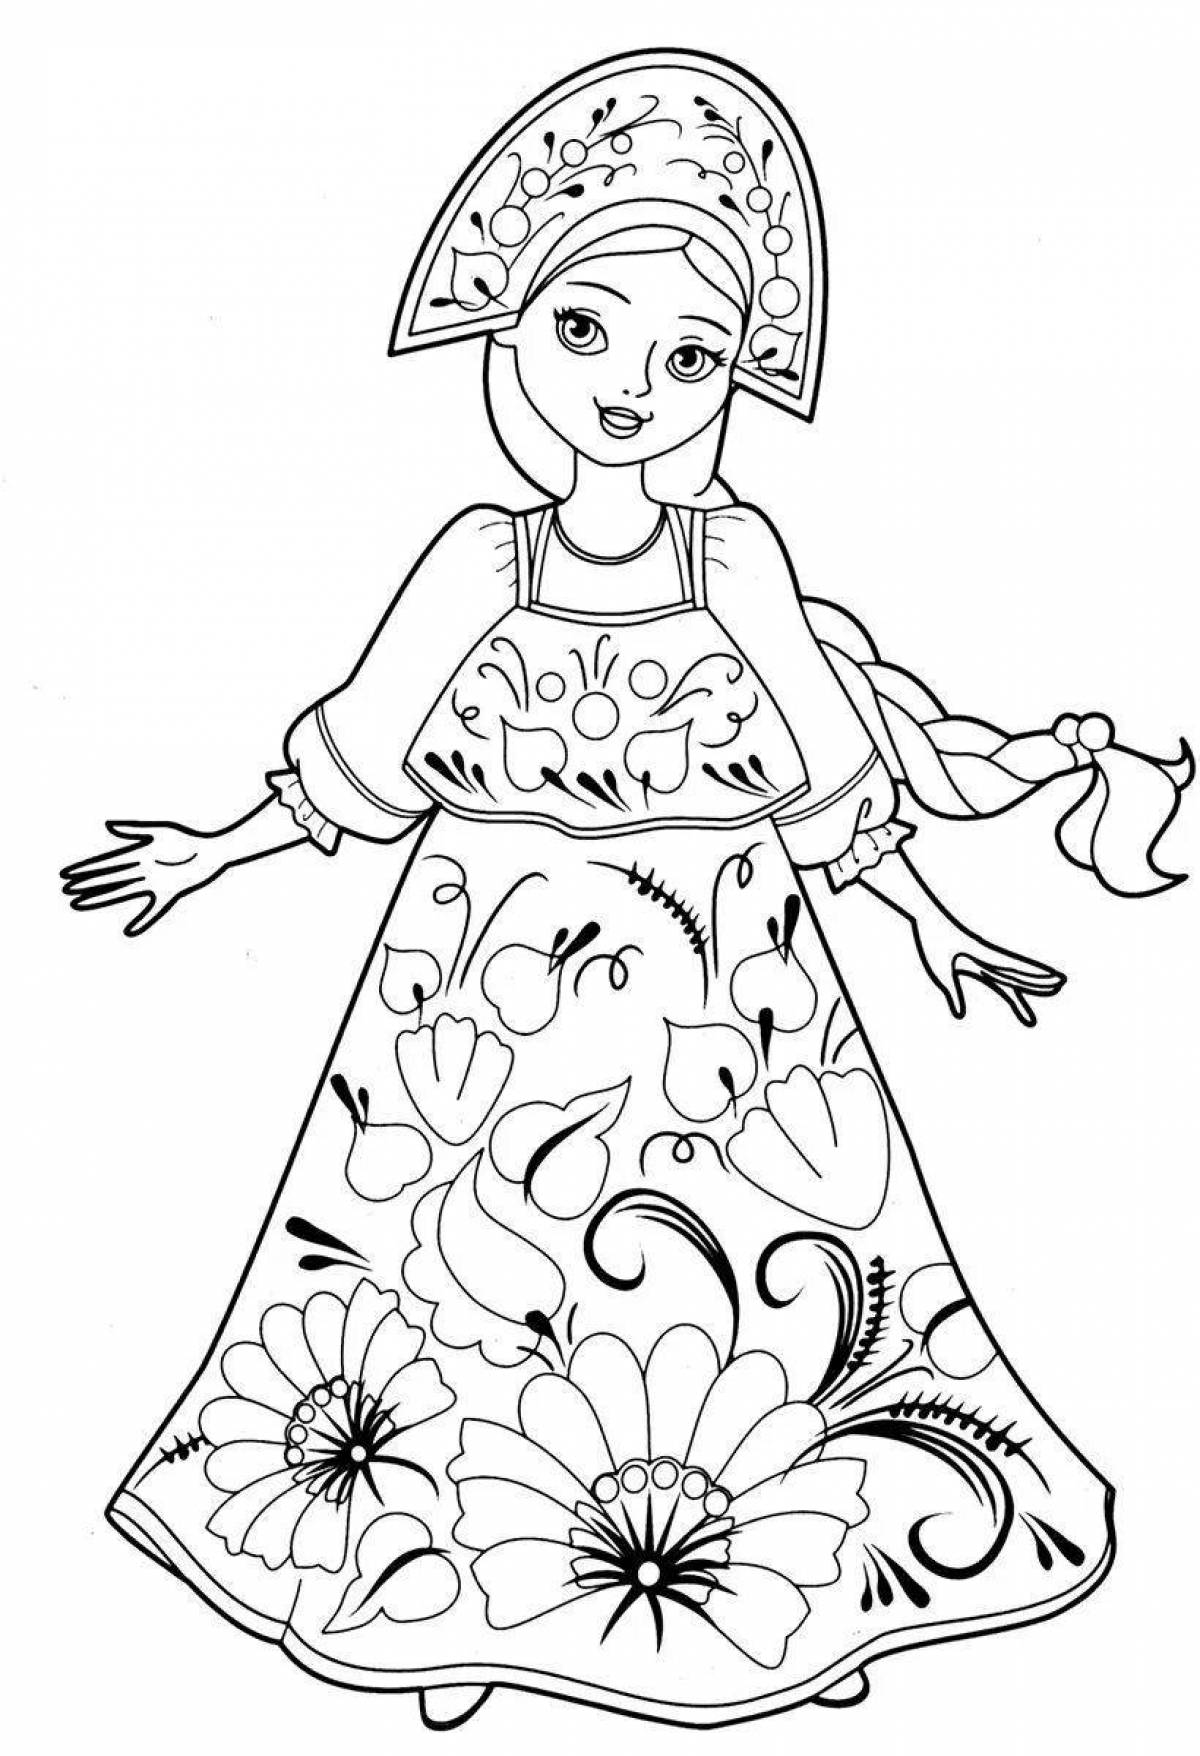 Exquisite Russian beauty coloring book